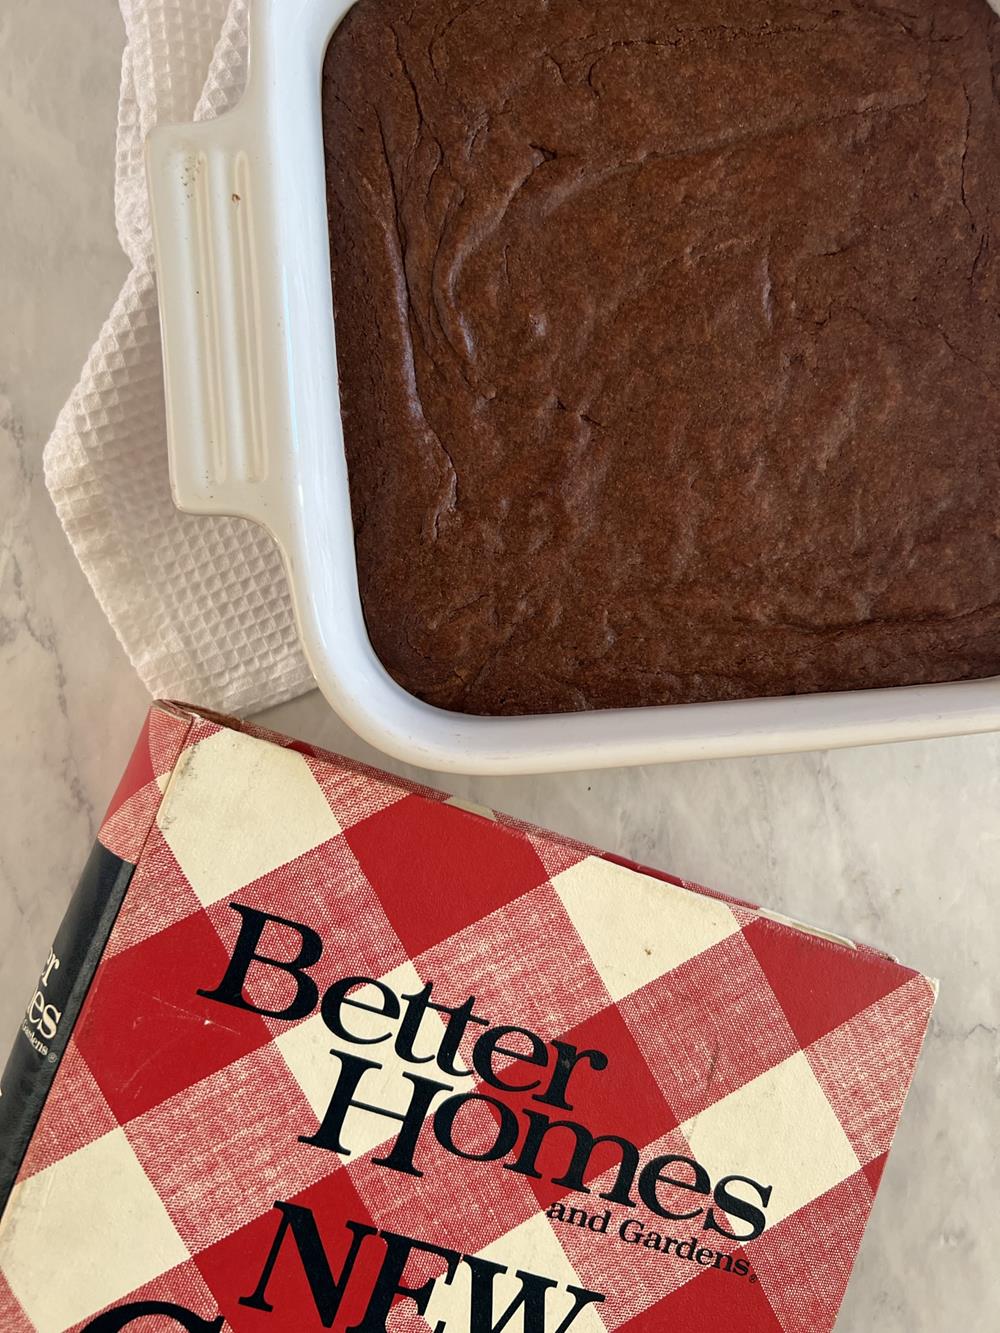 Better Homes and Garden cookbbok and a pan of brownies